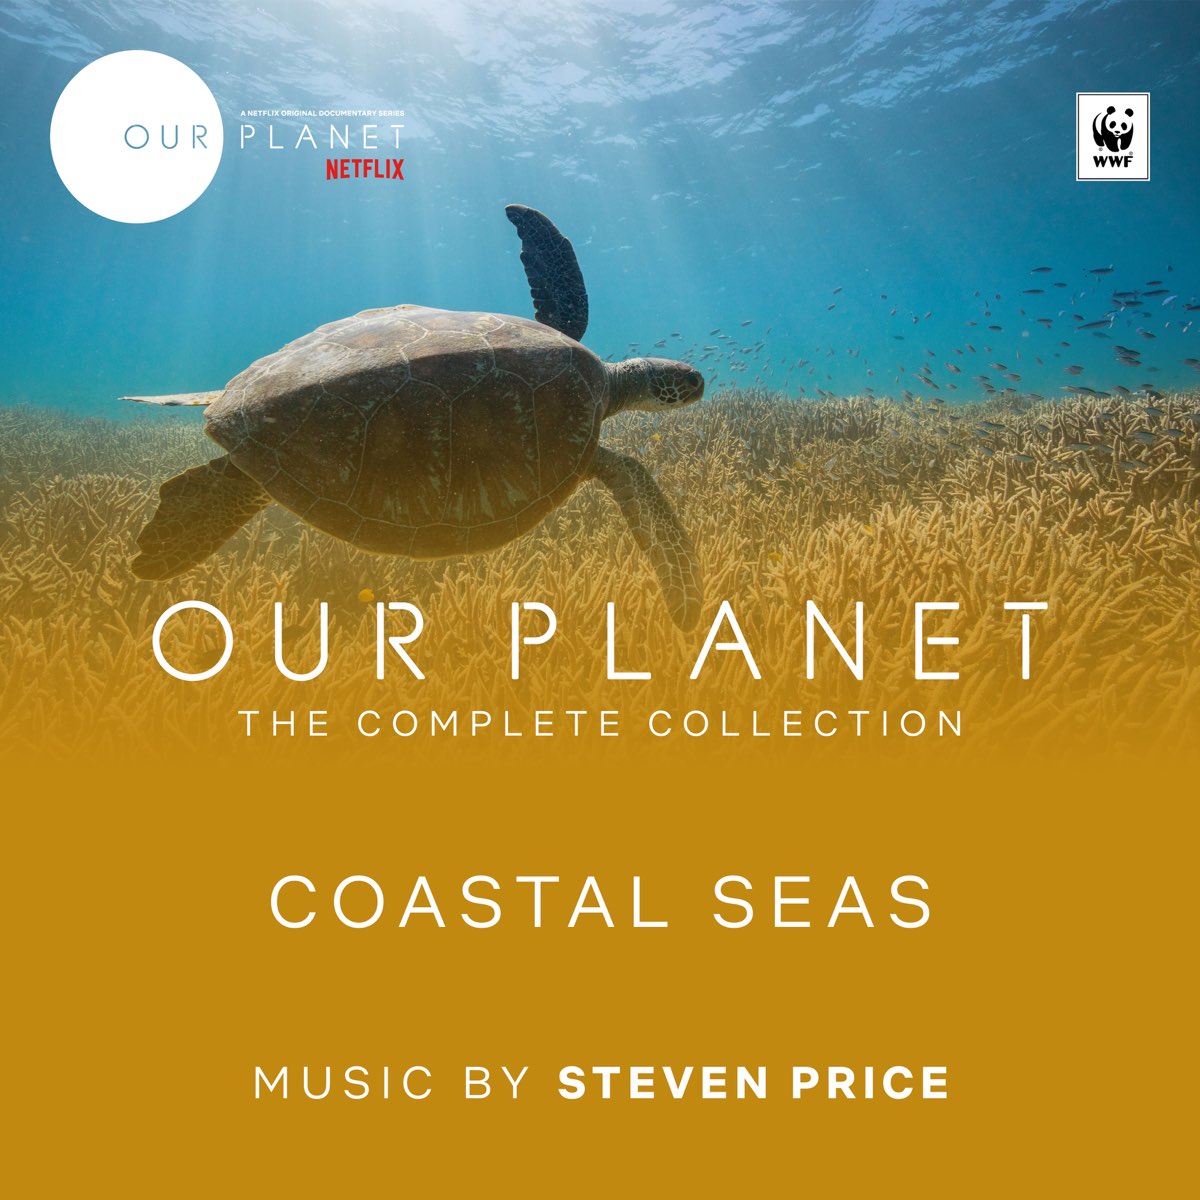 Our Planet (2019). Наша Планета Нетфликс. Our Planet 2019 Netflix. Our Planet Netflix Coastal Seas. Because of our planet gets hotter and